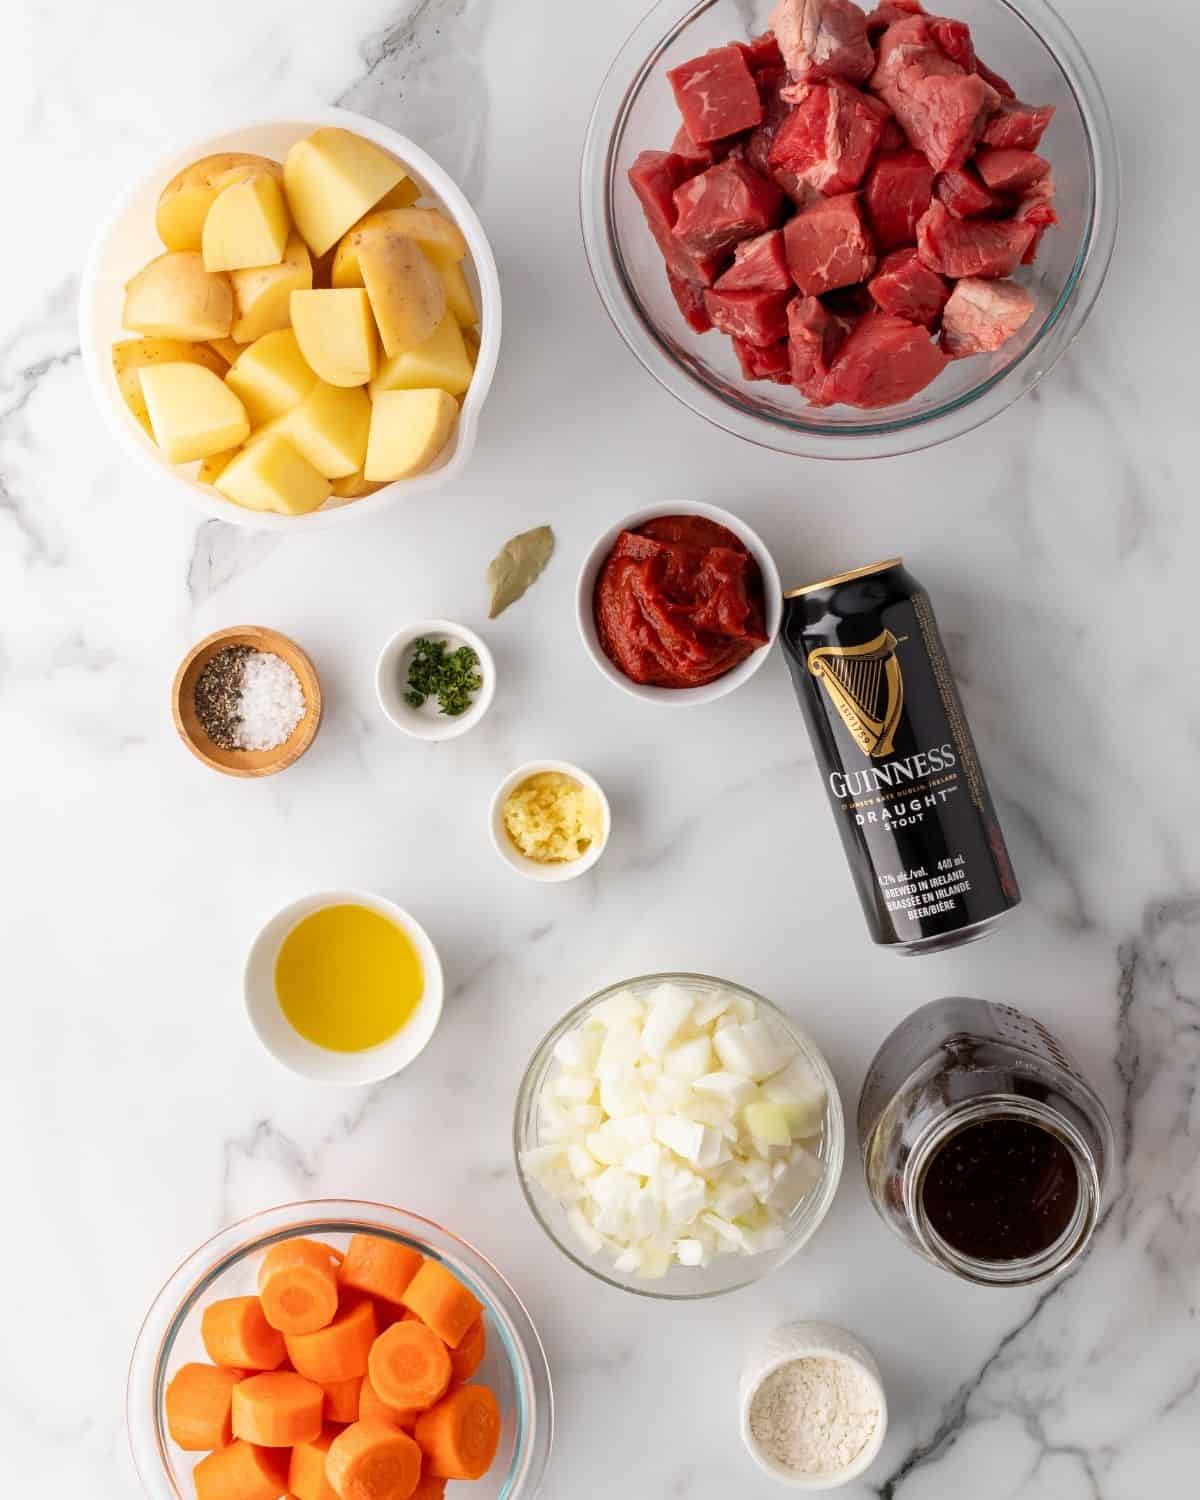 Ingredients to make Guinness Beef Stew